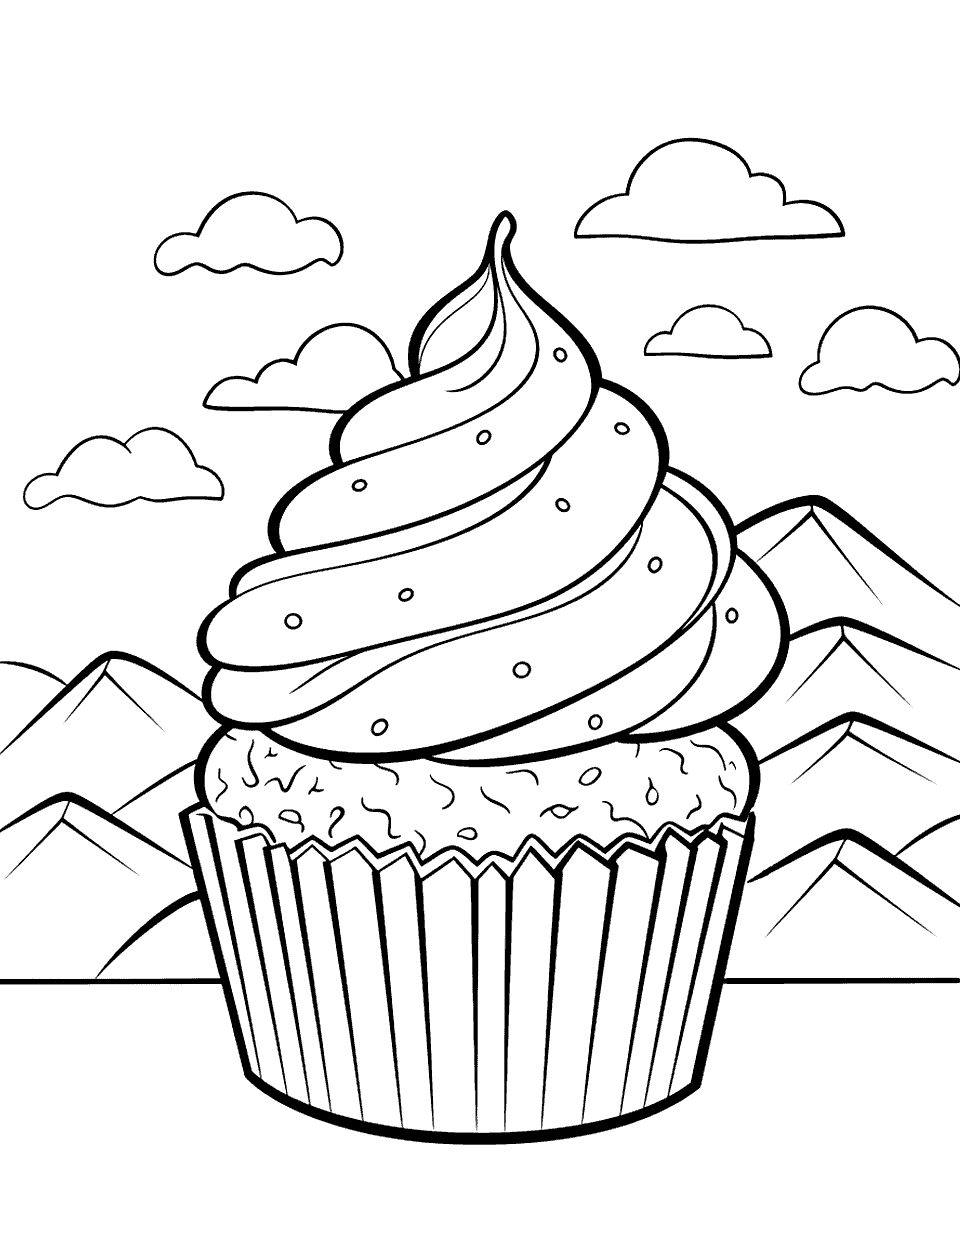 Mountain Landscape Cupcake Coloring Page - A cupcake with a mountain landscape as the backdrop.